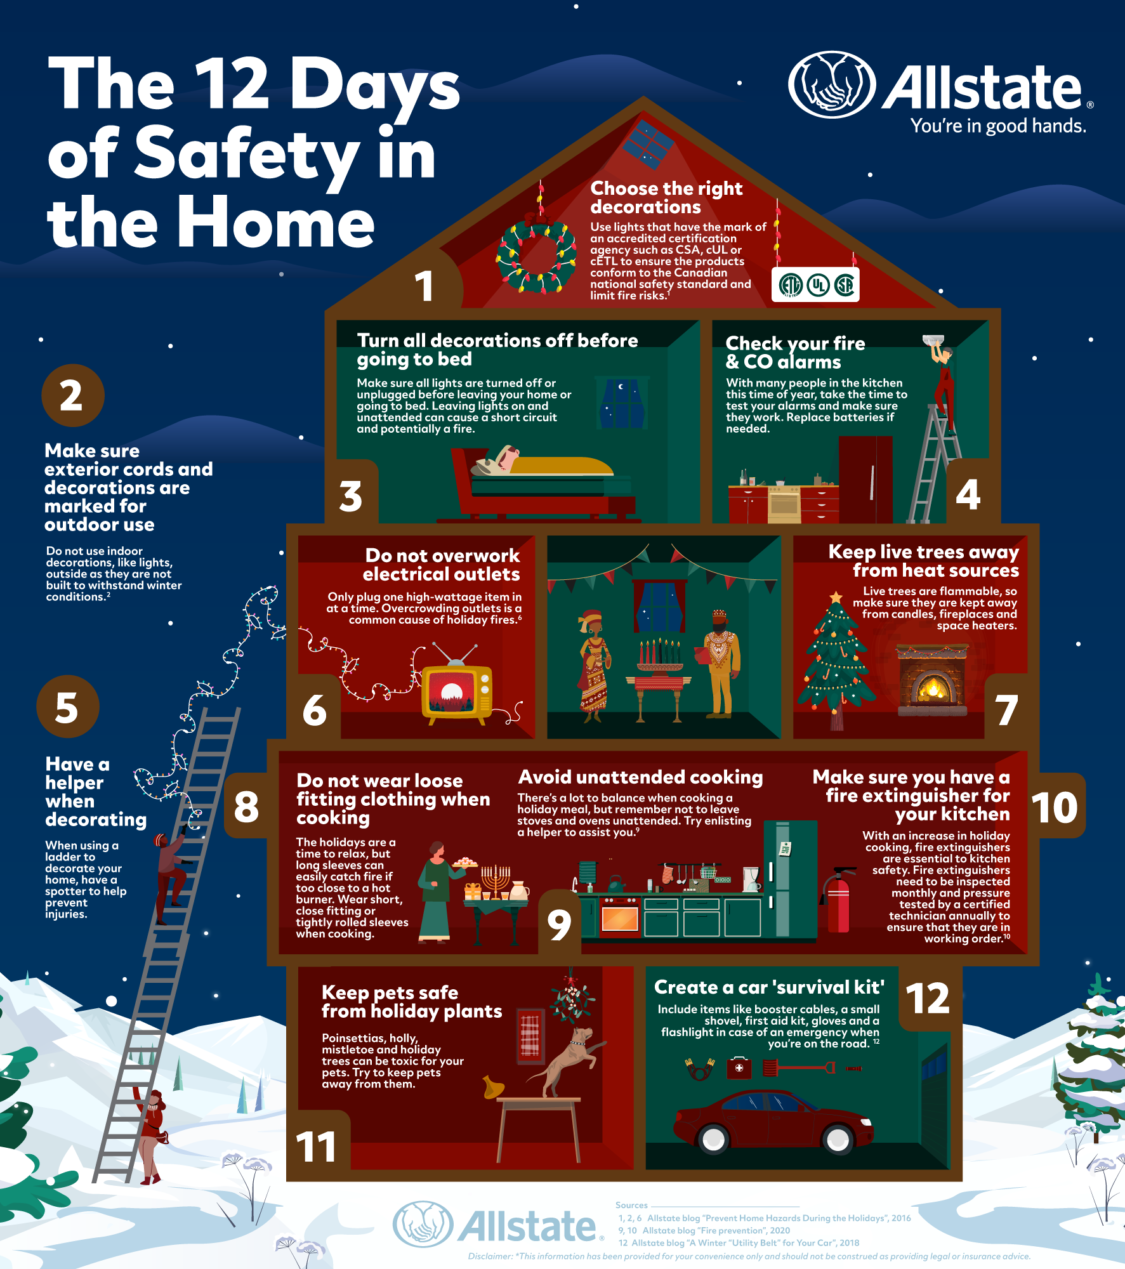 Allstate Canada's 12 Days of Safety in the Home